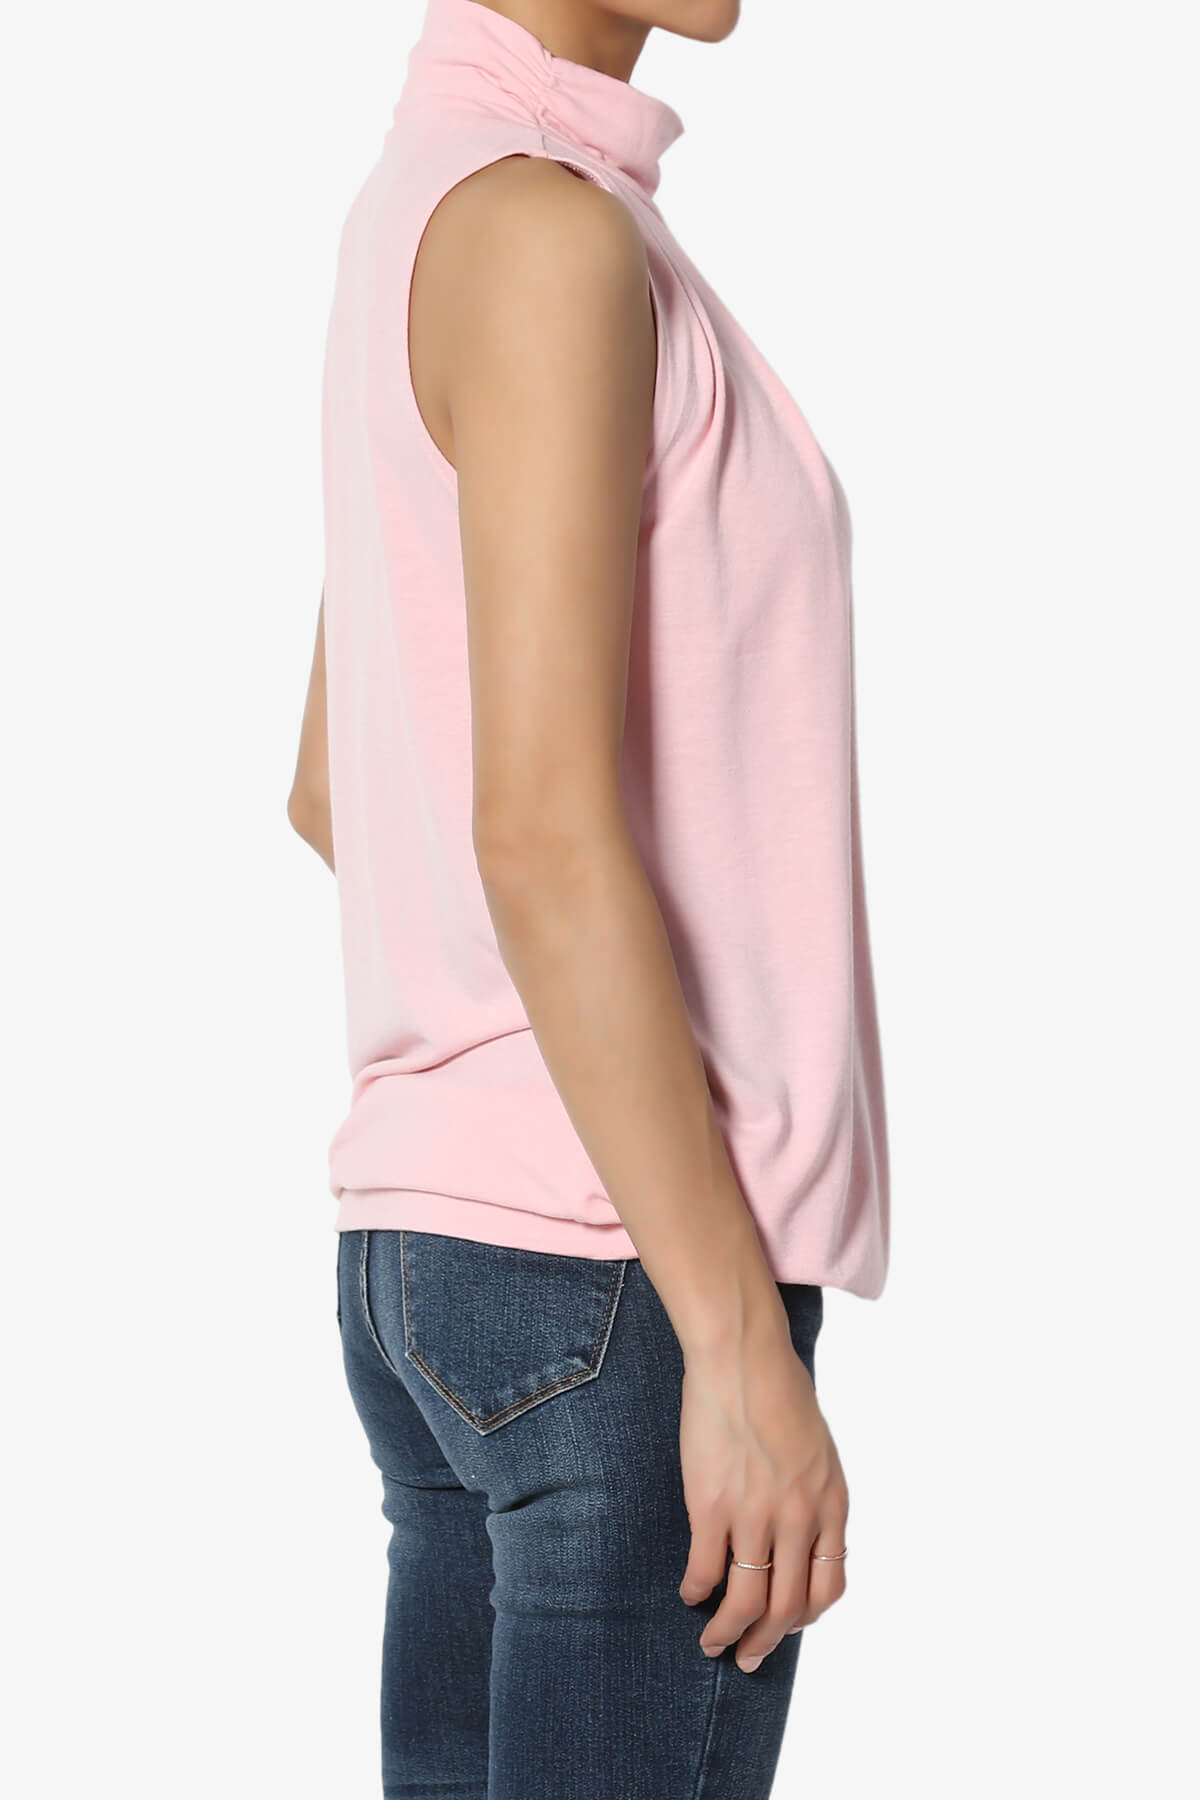 Load image into Gallery viewer, Jibbitz Sleeveless Mock Neck Pleated Top DUSTY PINK_4
